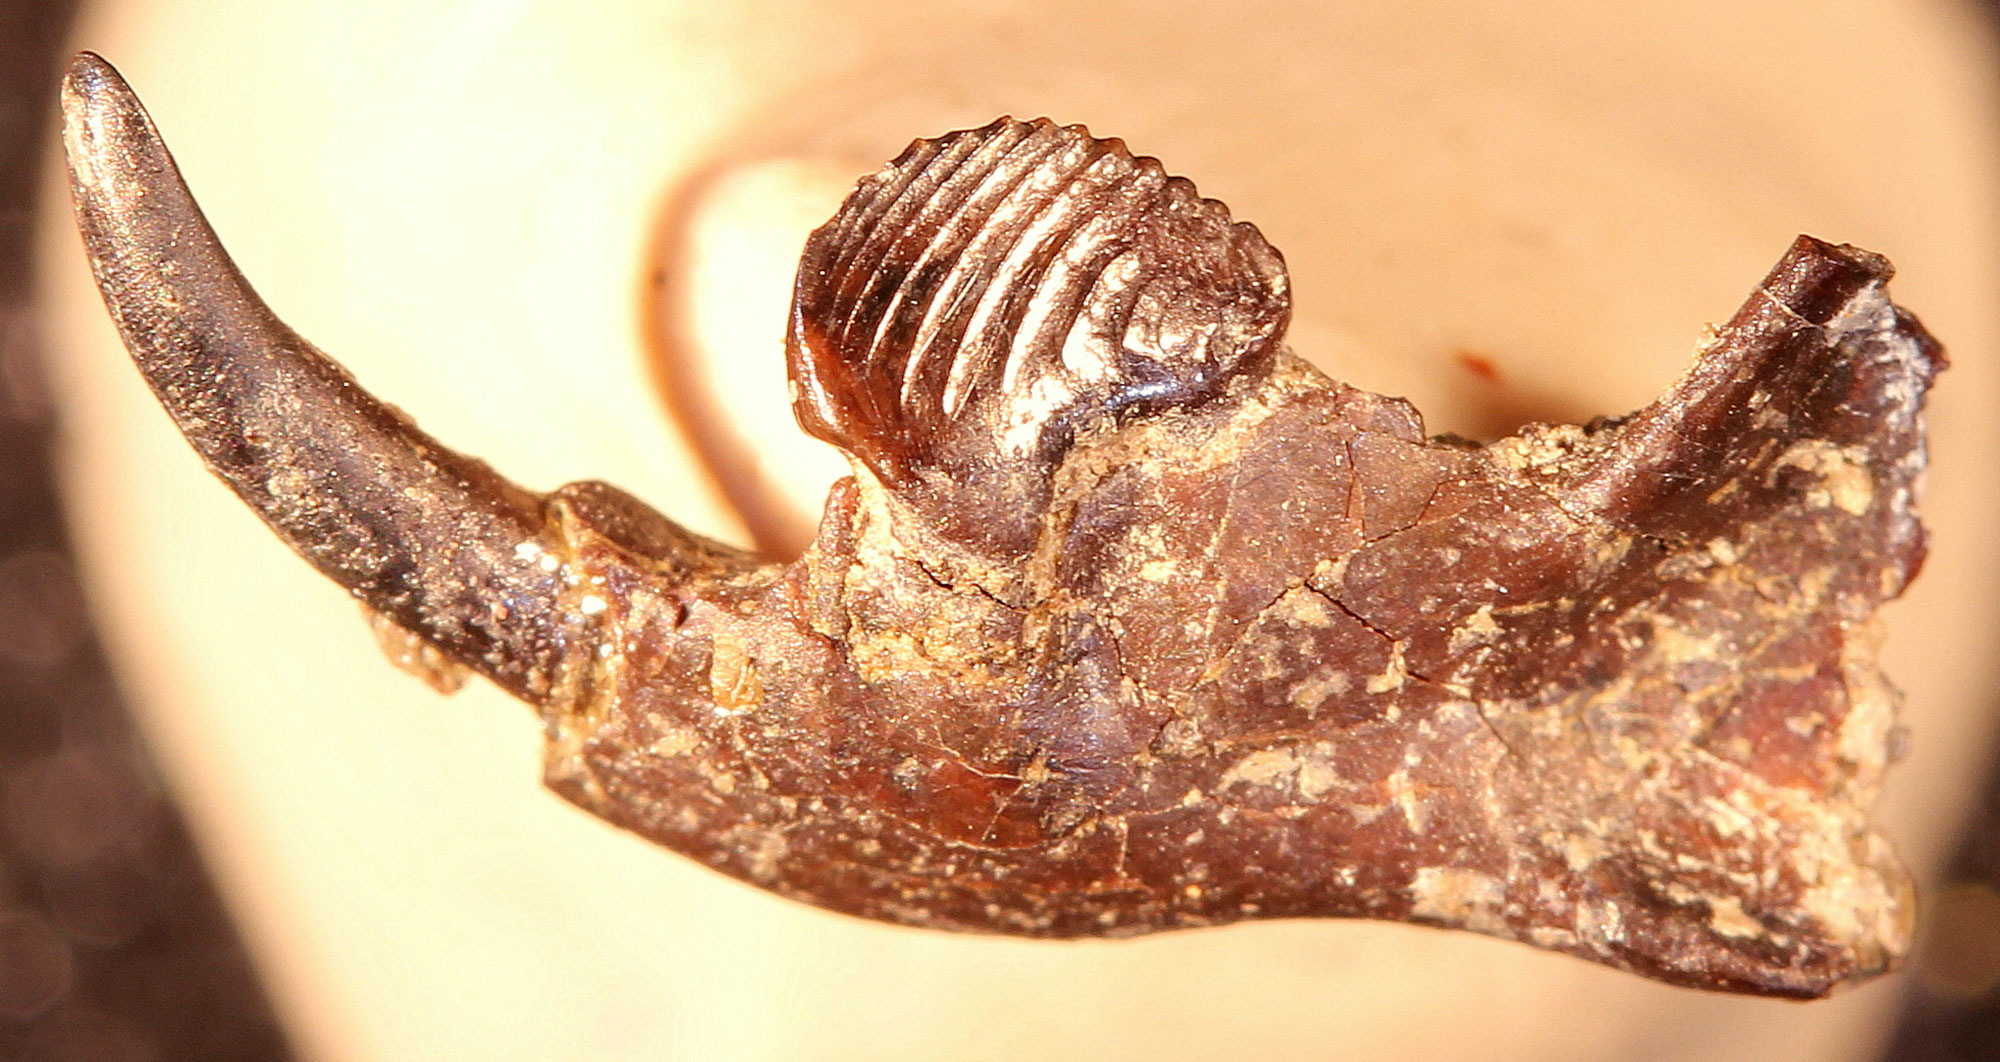 Photograph of the lower jaw of a multituberculate mammal from the Paleocene Fort Union Formation of Montana. The photo shows the front portion of a small lower jaw that ends in an elongated, tooth. One tooth, possibly a molar, in the jaw has multiple parallel ridges on its biting surface.